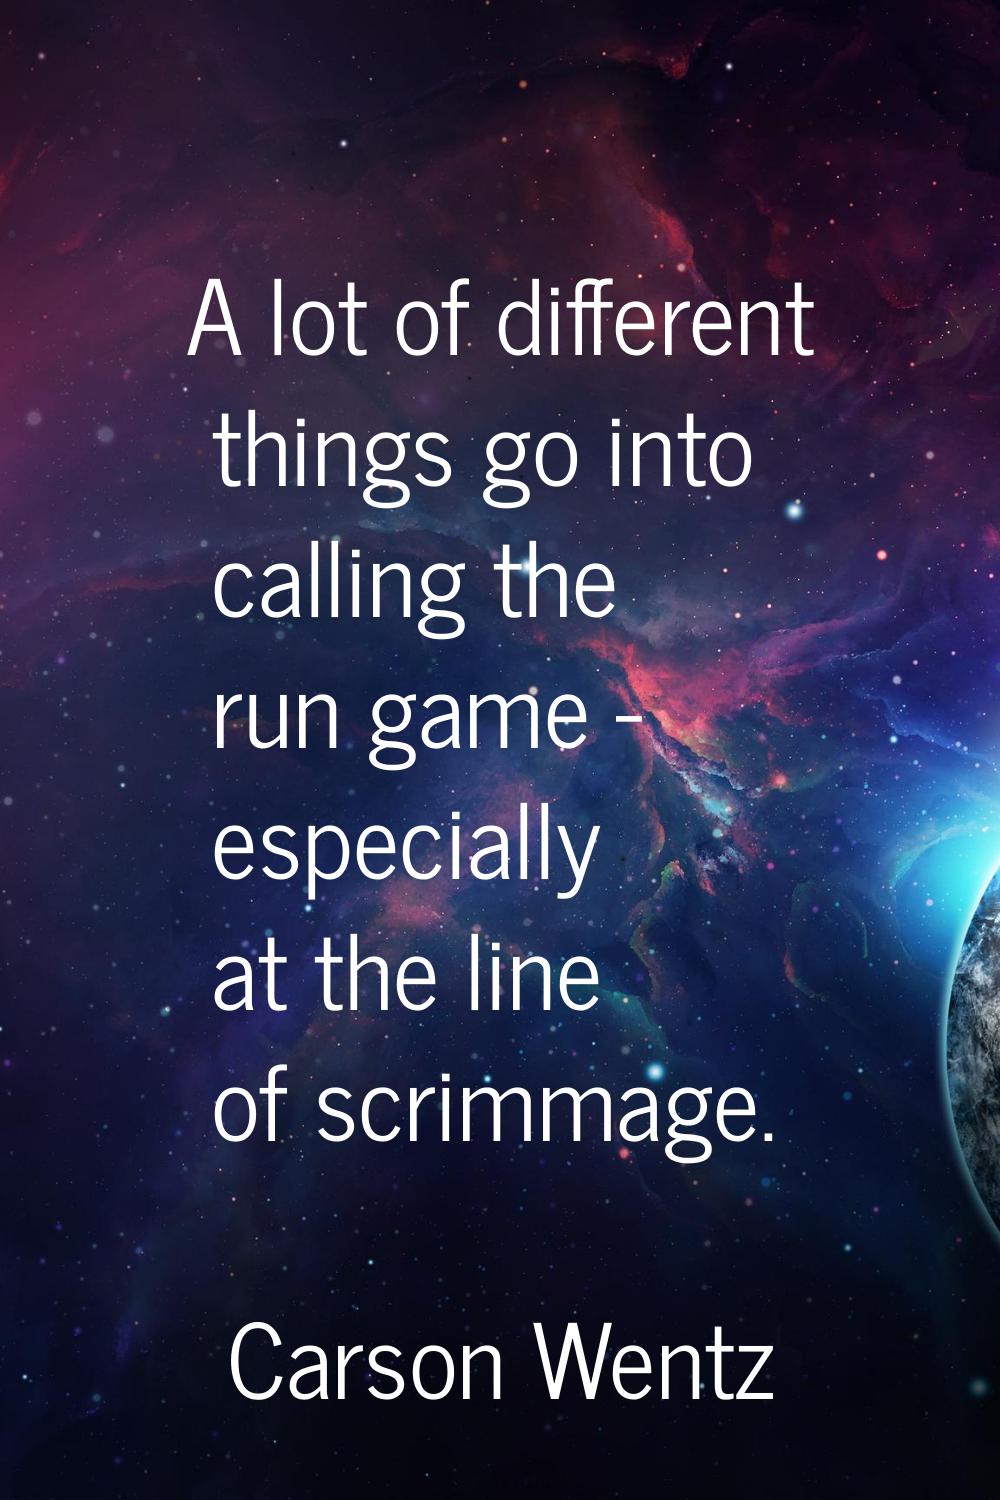 A lot of different things go into calling the run game - especially at the line of scrimmage.